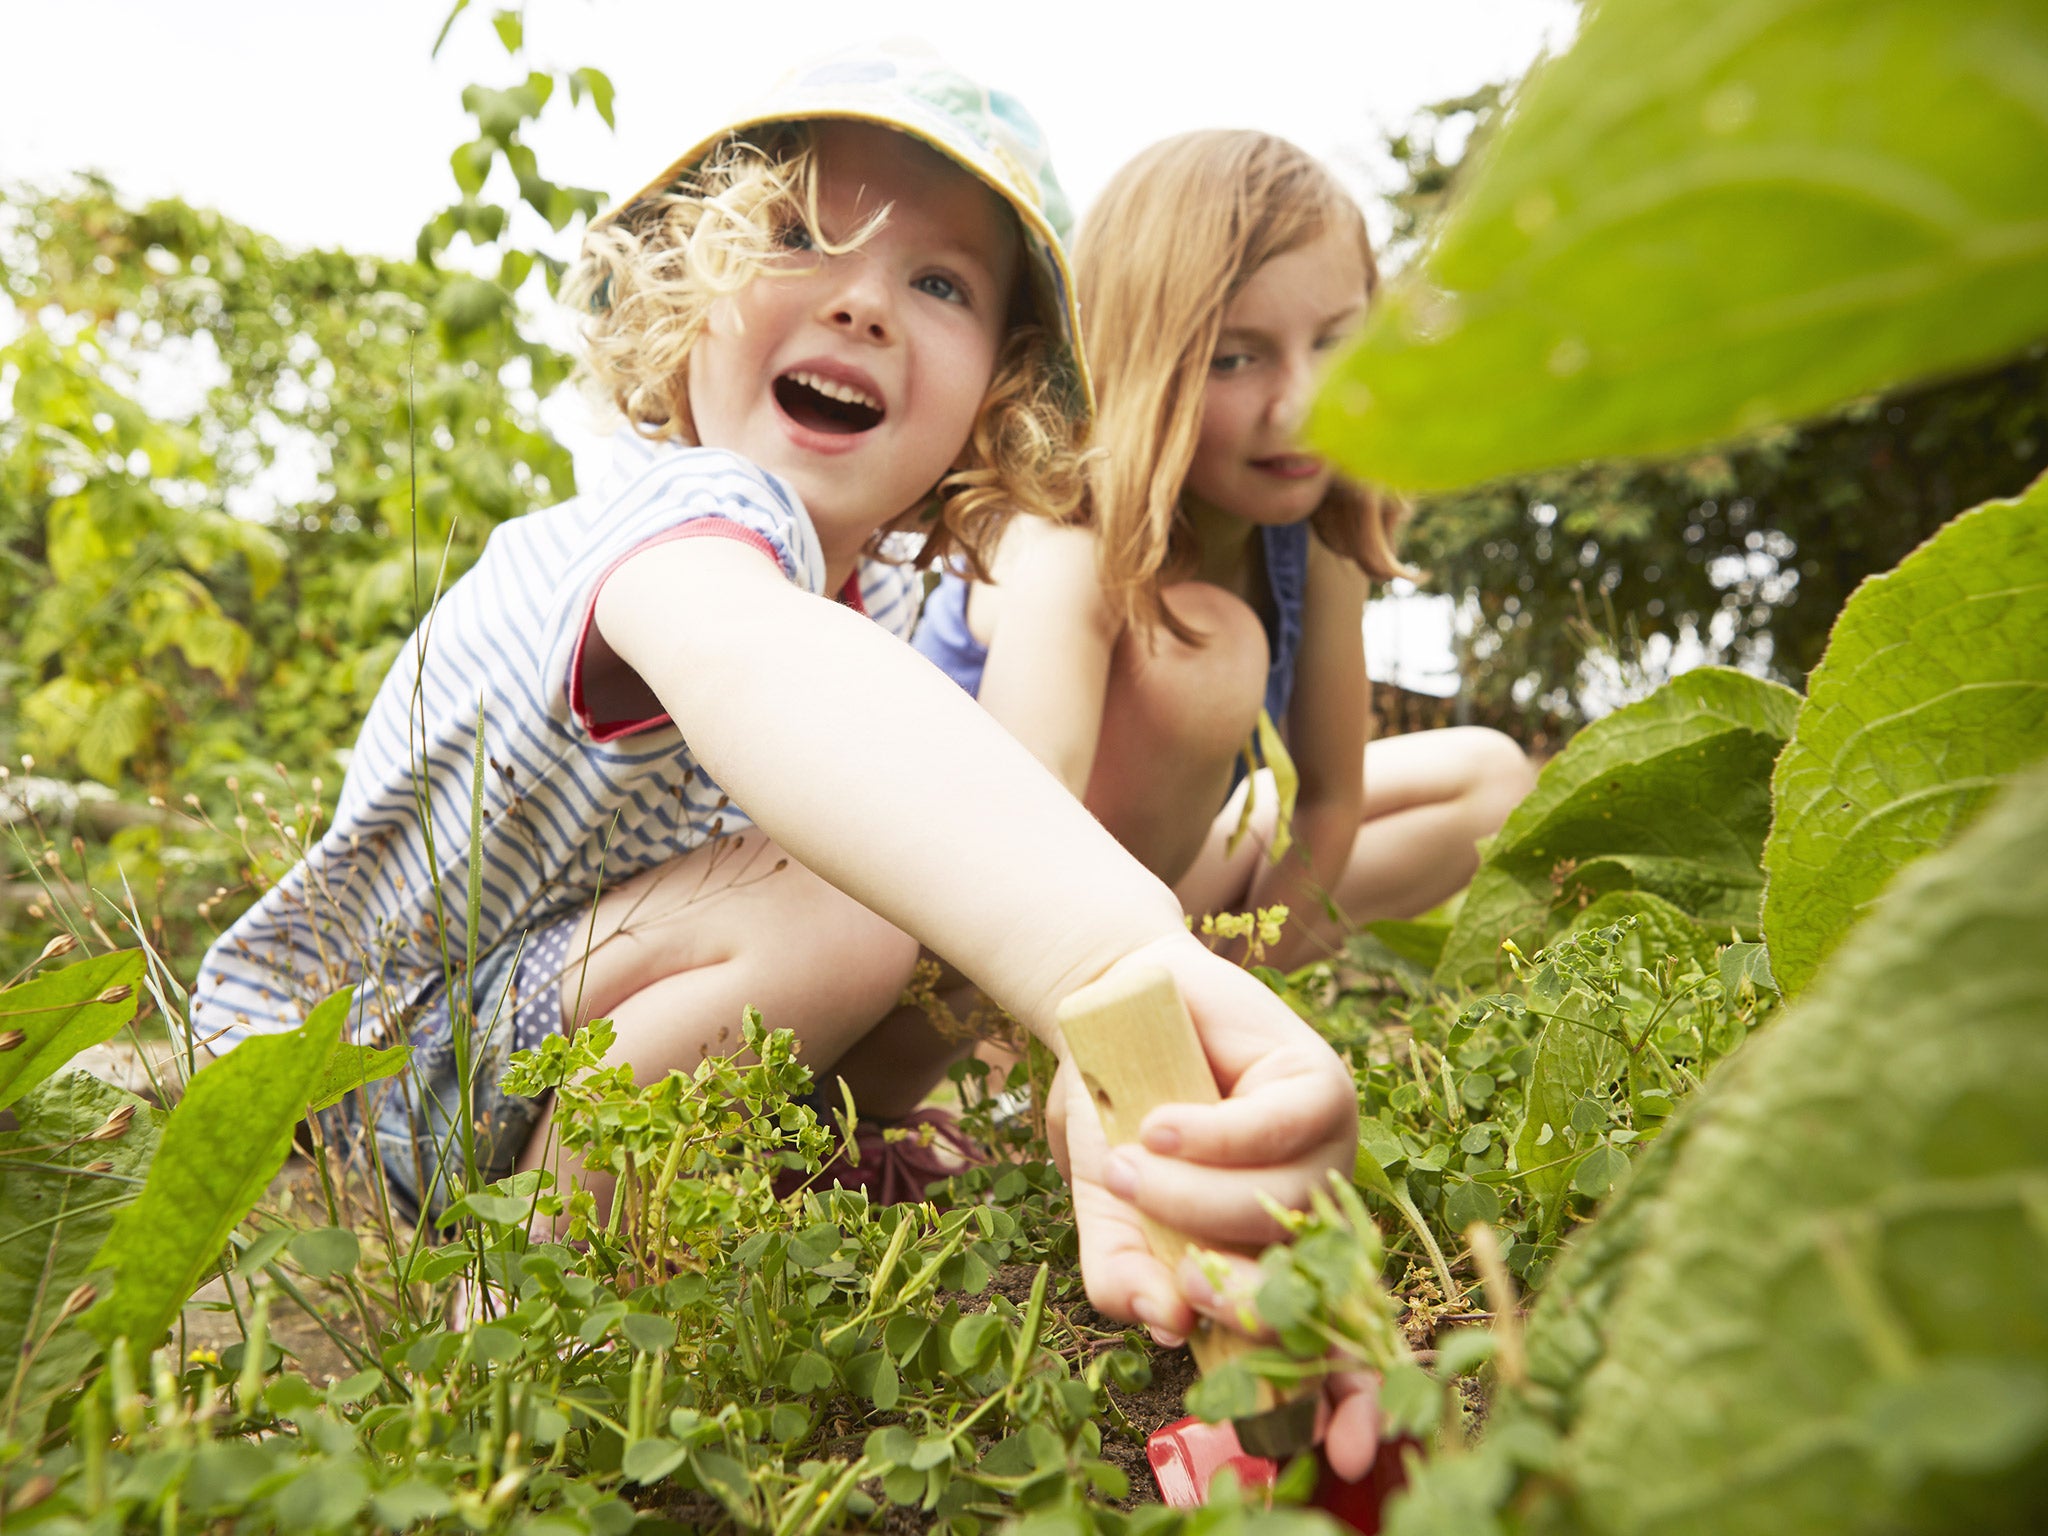 Gardening can educate children on healthy foods and combat obesity, researchers claim